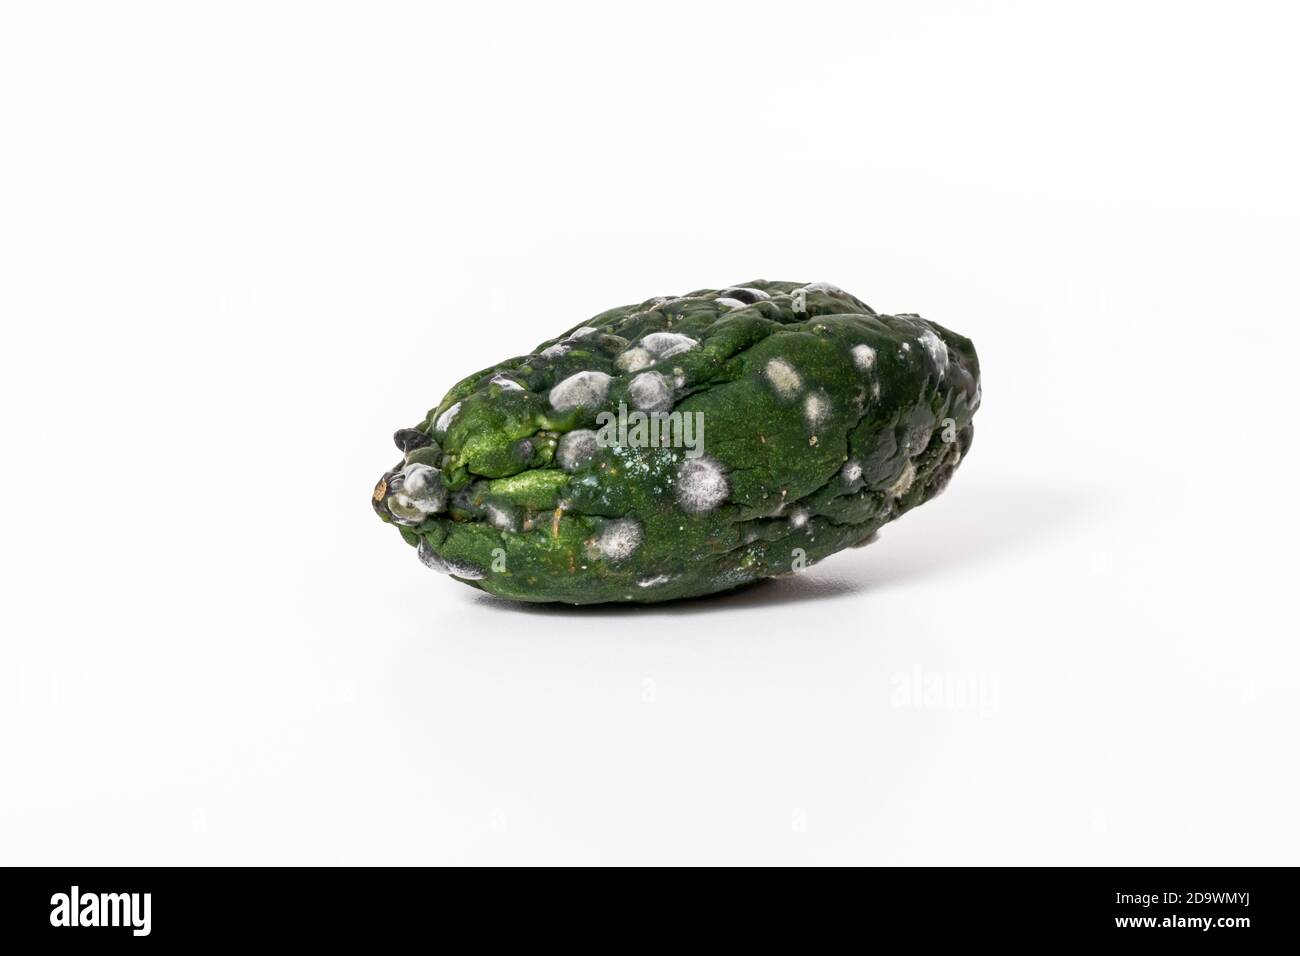 Spoiled cucumber covered with mold isolated on white background. Stock Photo